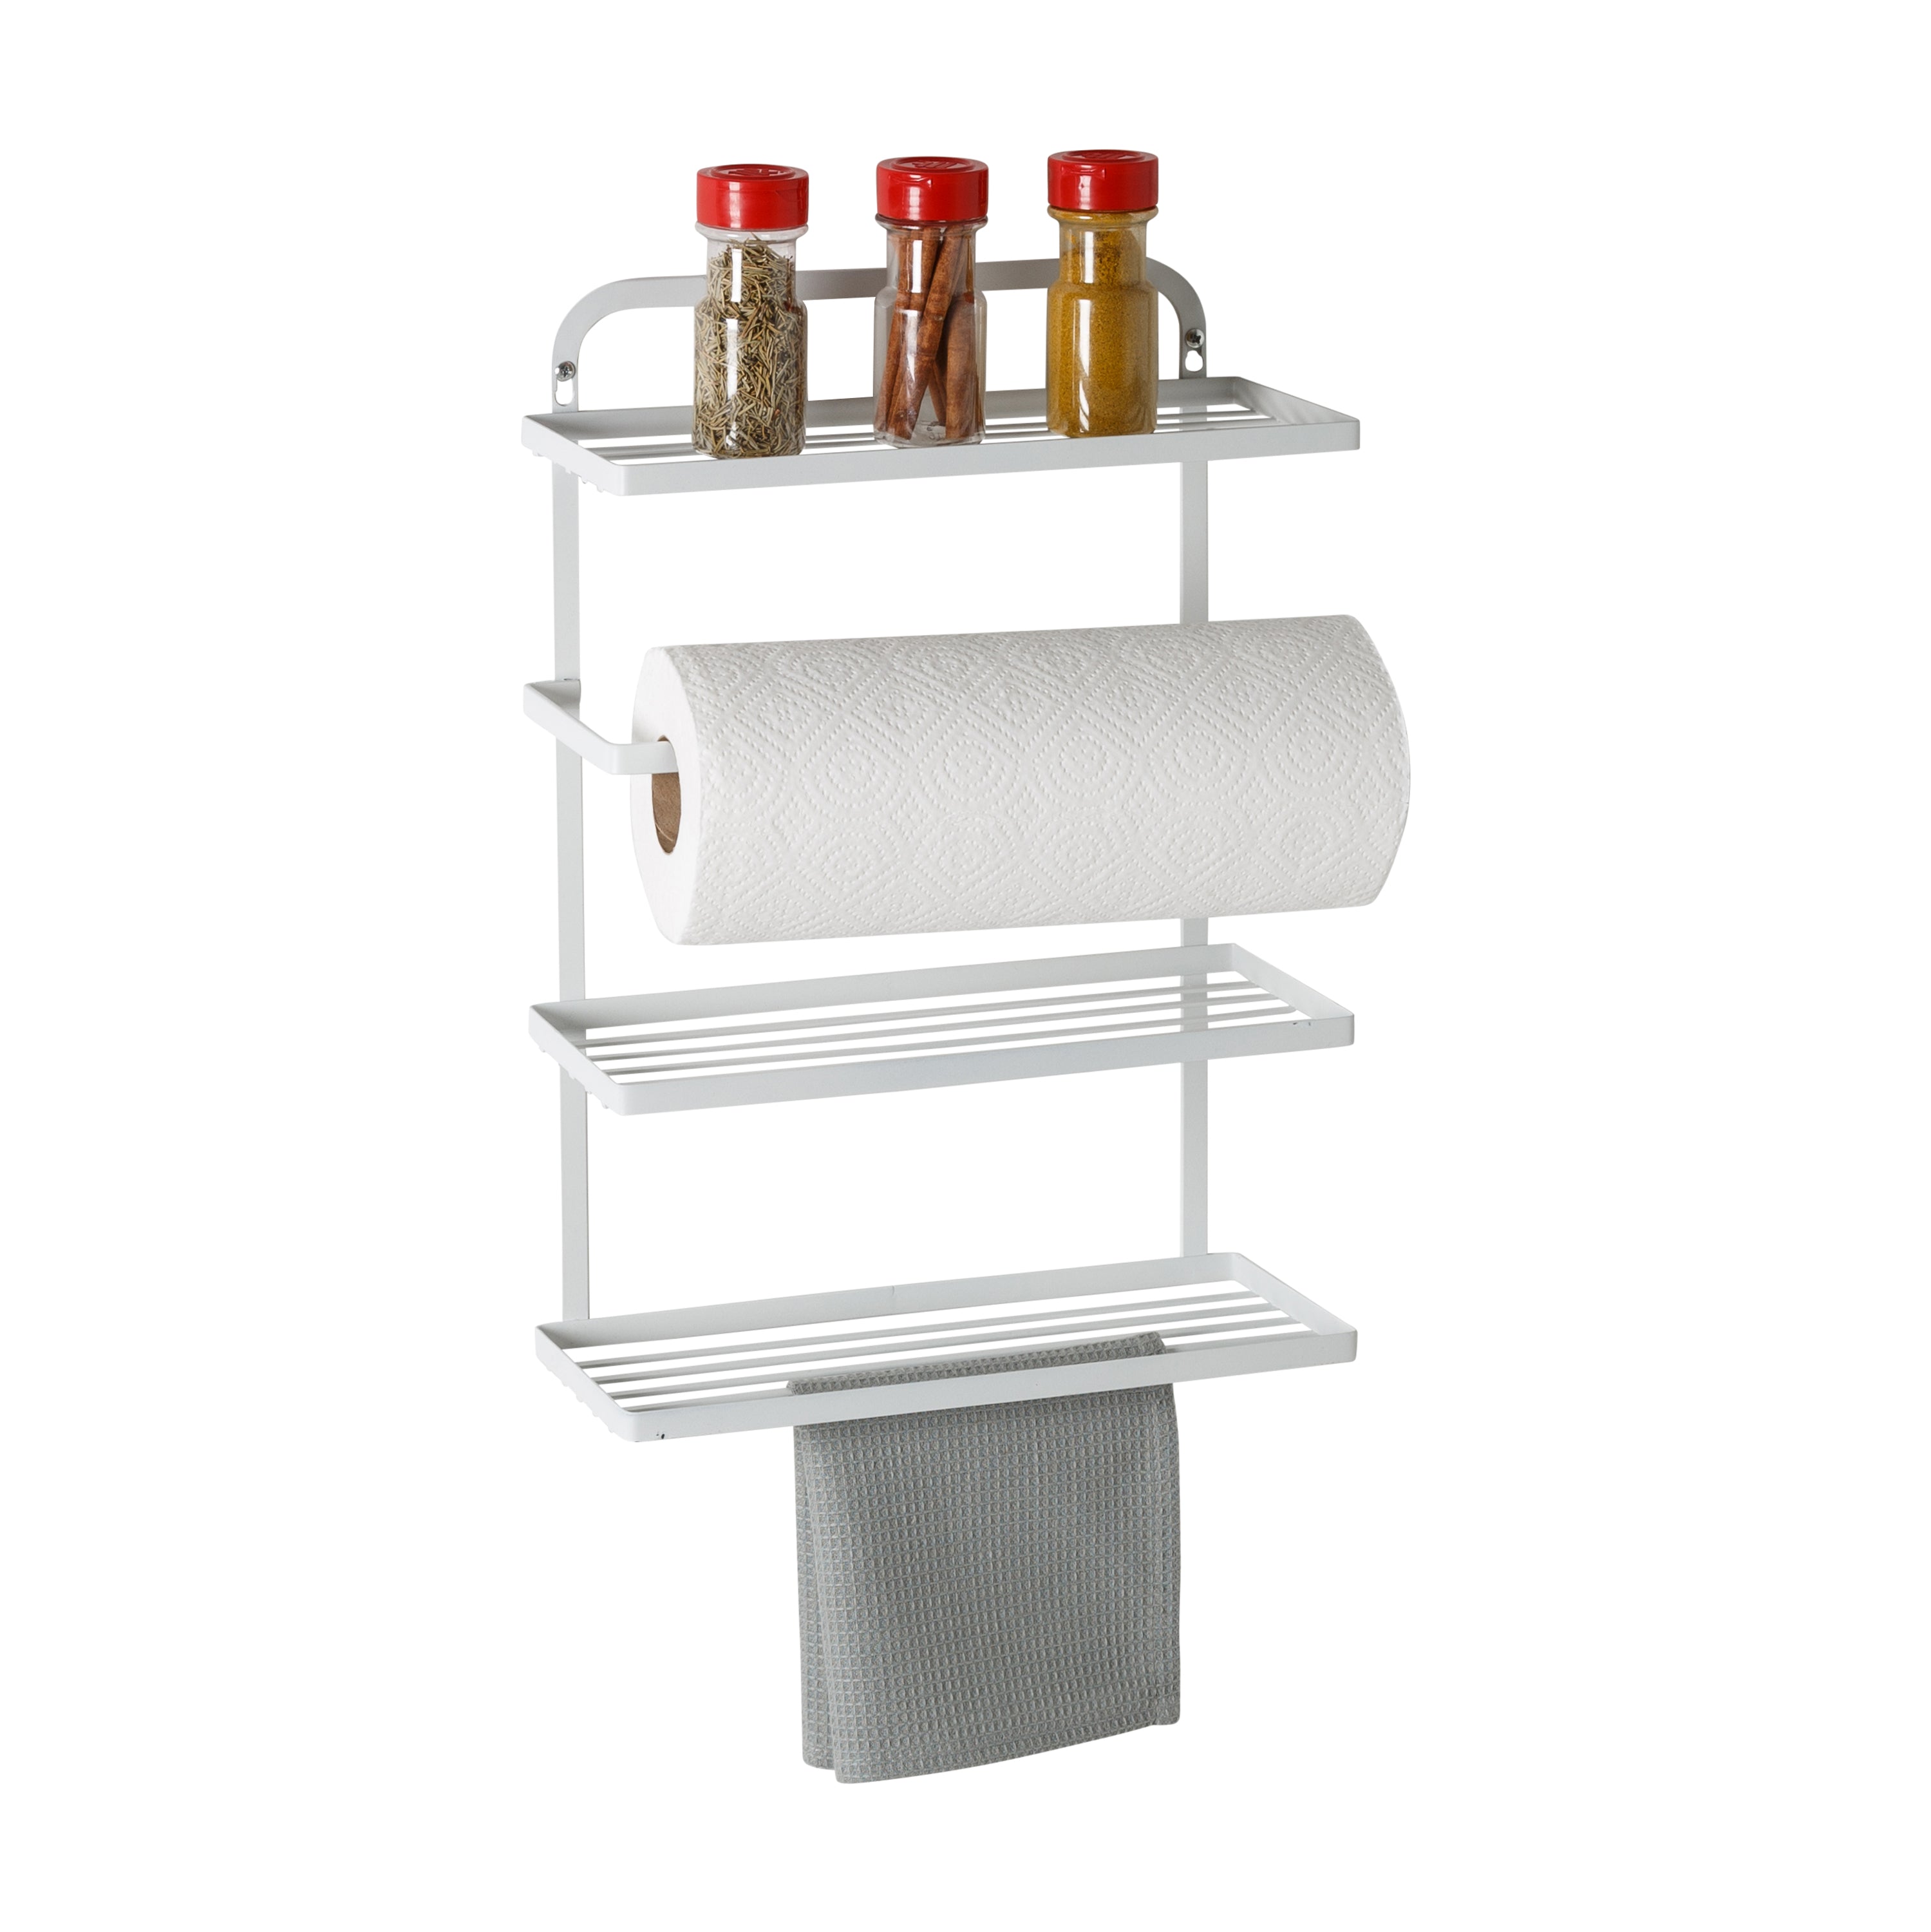 Slim Spice Caddy: Reviewers Love This Rotating Organizer